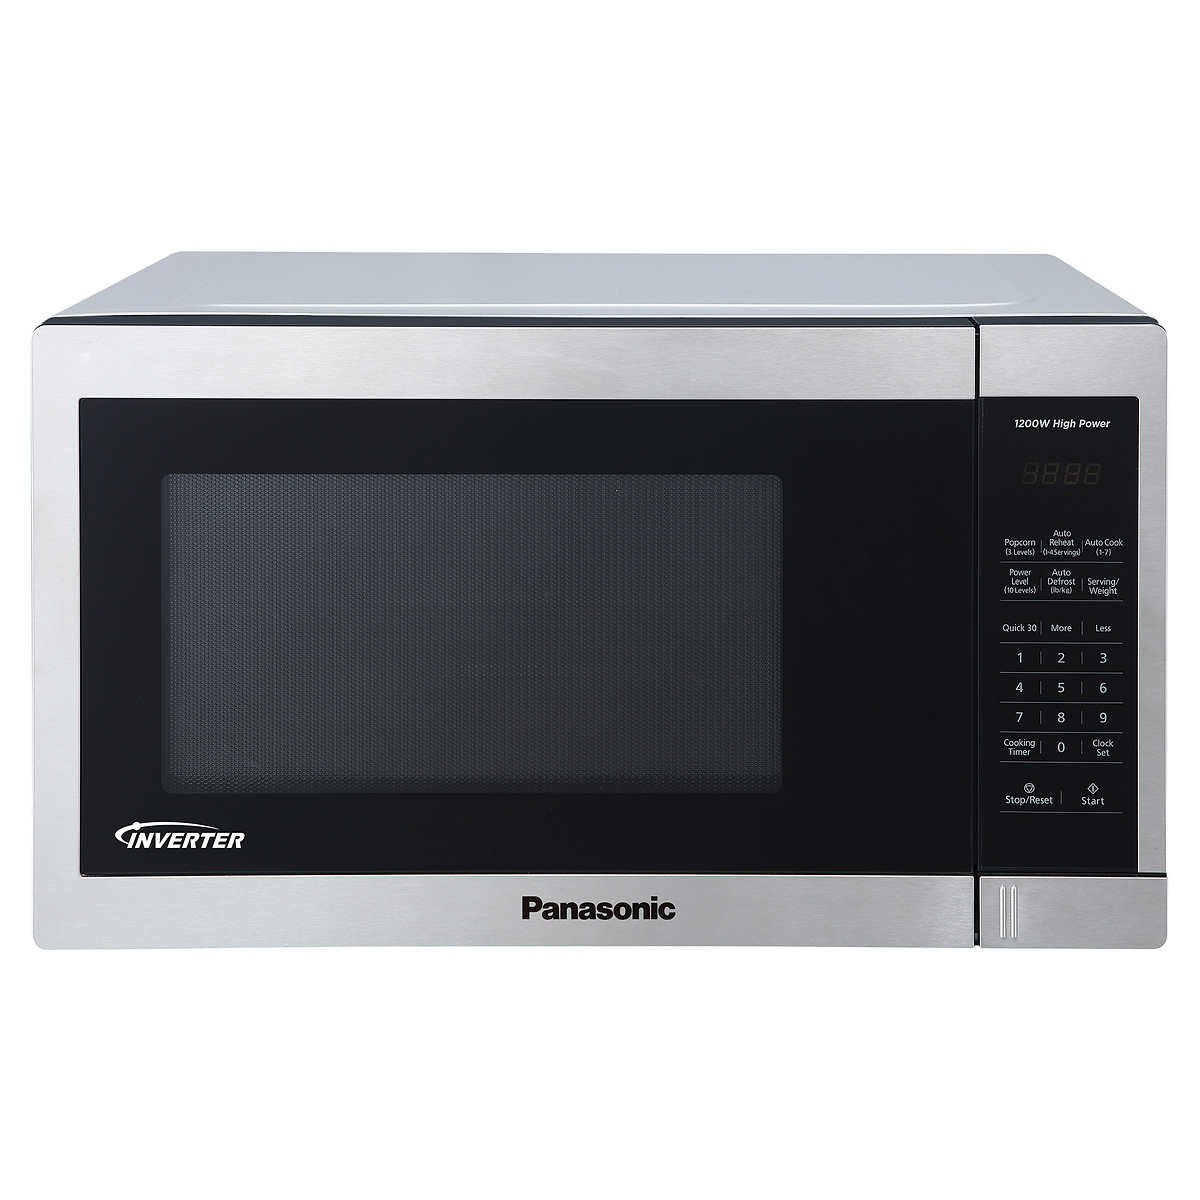 Black ft Renewed NN-SN65KB 1.2 cu Quick 30sec and Turbo Defrost Panasonic Compact Microwave Oven with 1200 Watts of Cooking Power Popcorn Button Sensor Cooking